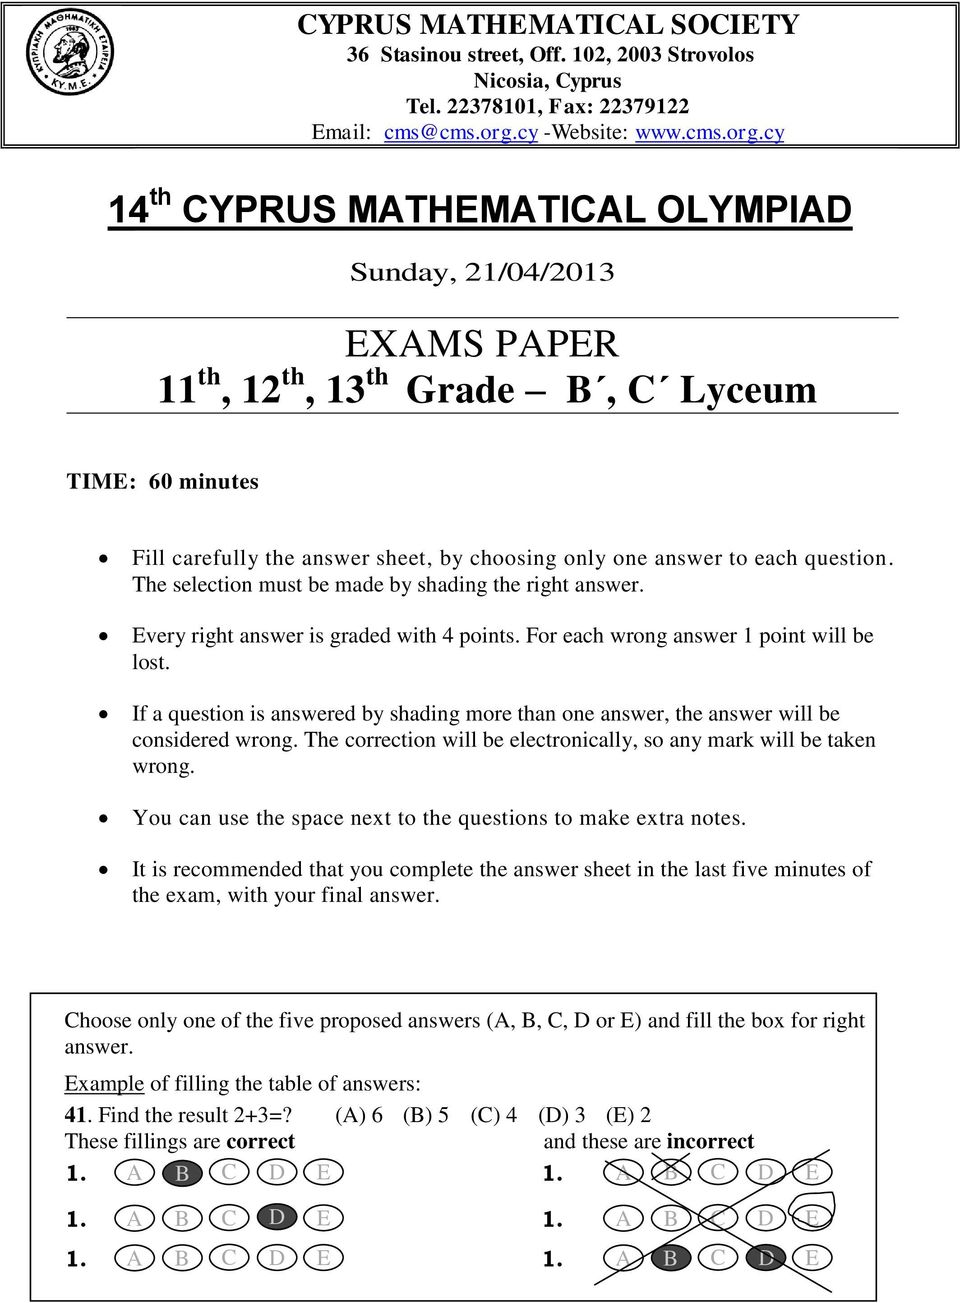 cy 14 th CYPRUS MATHEMATICAL OLYMPIAD Sunday, 21/04/2013 EXAMS PAPER 11 th, 12 th, 13 th Grade B, C Lyceum TIME: 60 minutes Fill carefully the answer sheet, by choosing only one answer to each